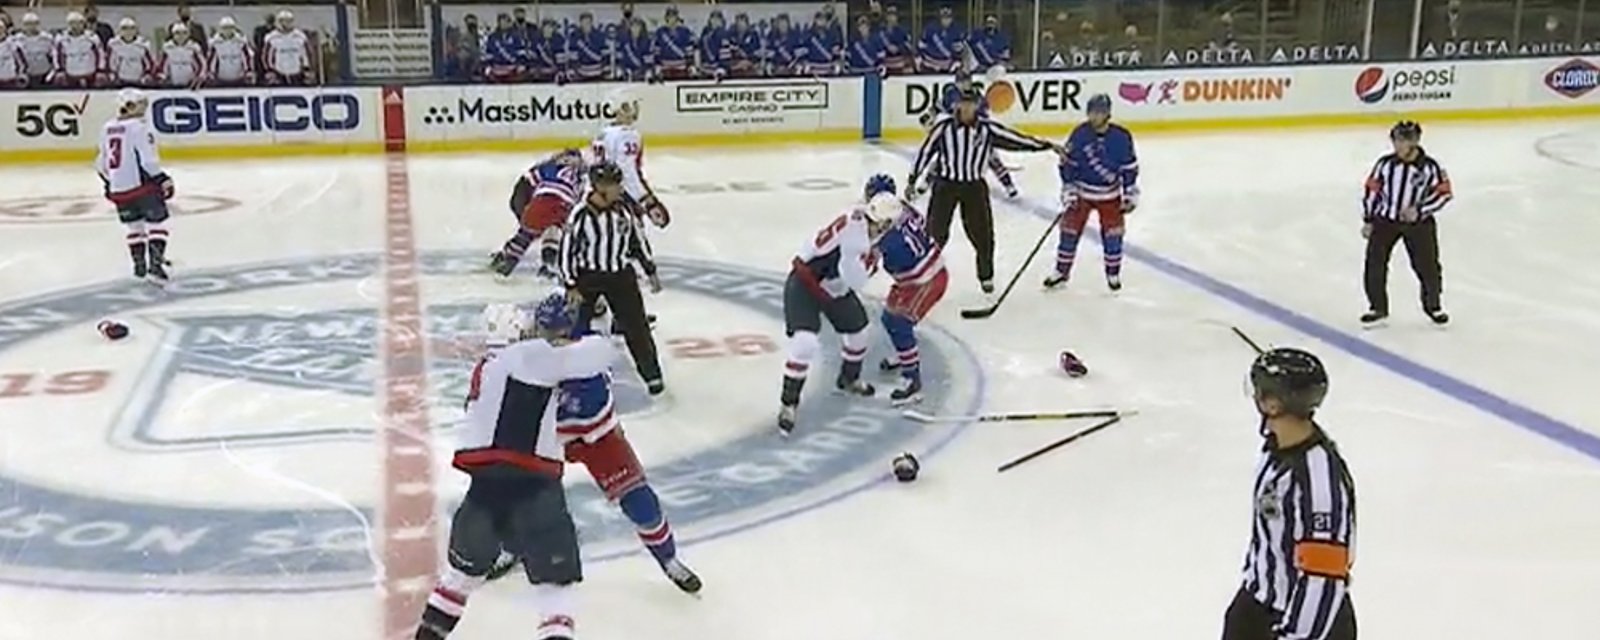 Rangers and Capitals begin the game with an old fashioned line brawl